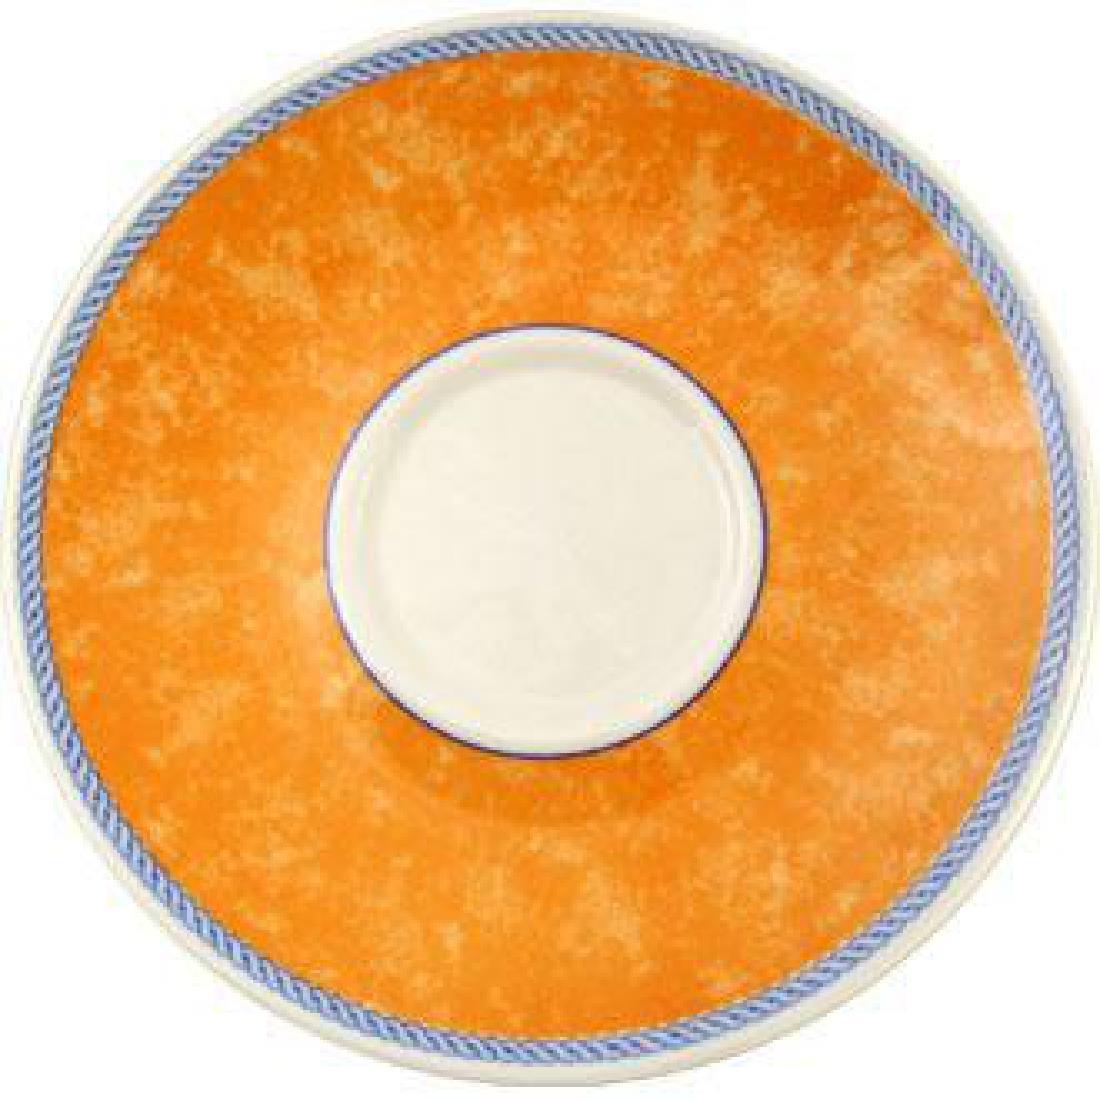 W026 - New Horizons Marble Border Cappuccino Saucer